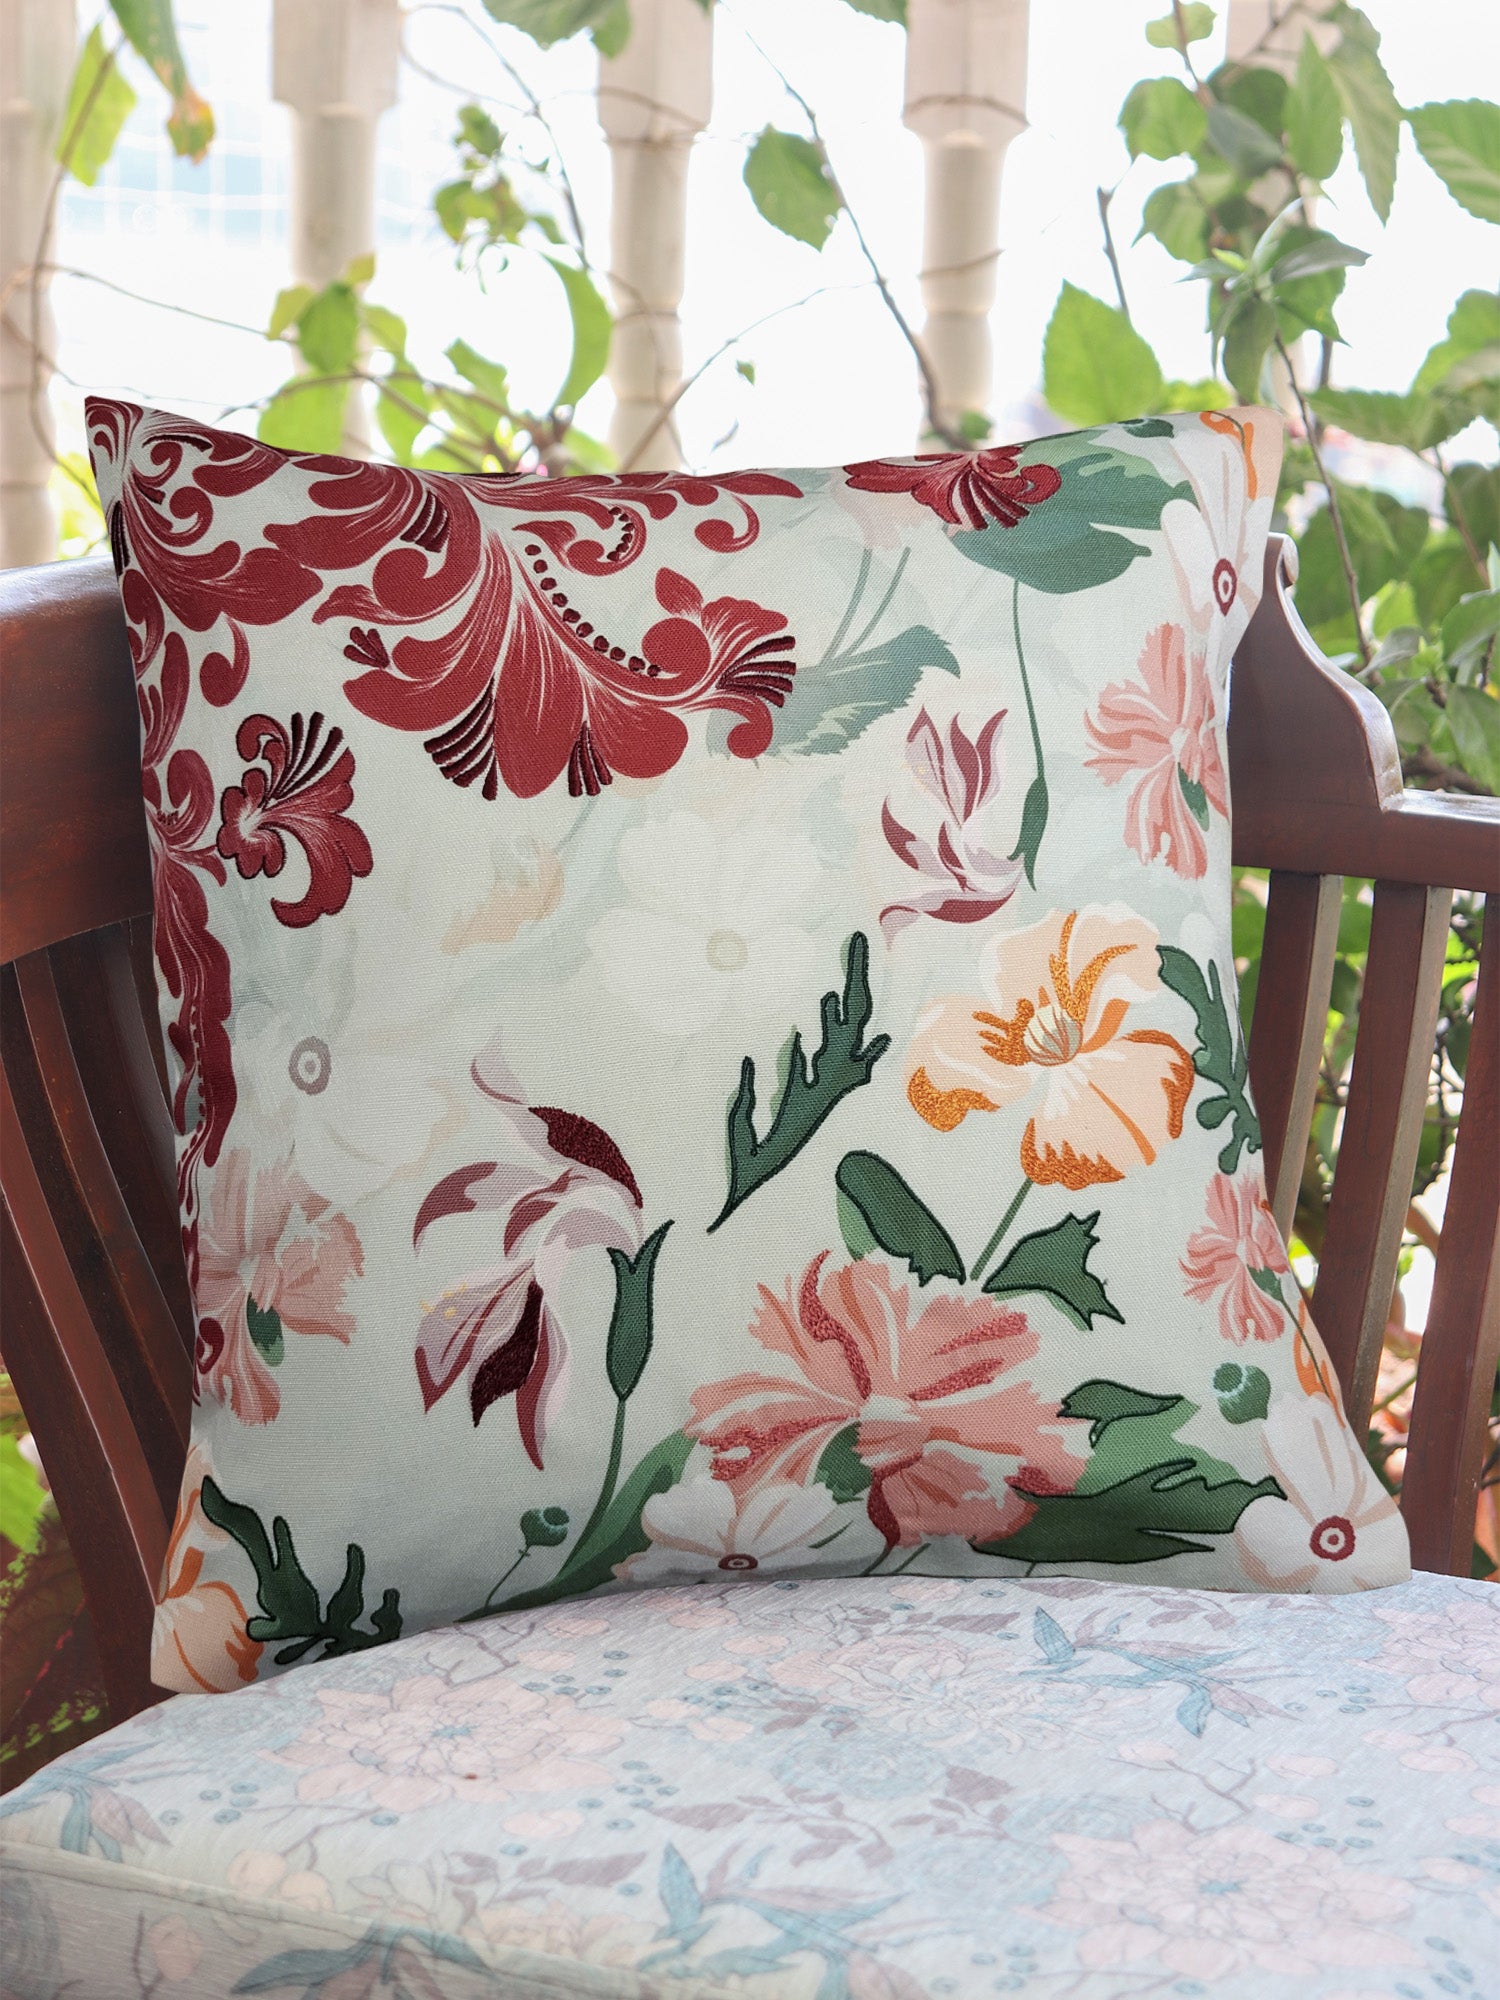 Cushion Cover with Digital Printed Floral with Embroidery - Polycanvas | Multicolor - 16x16in (40x40cm) (Pack of 1)